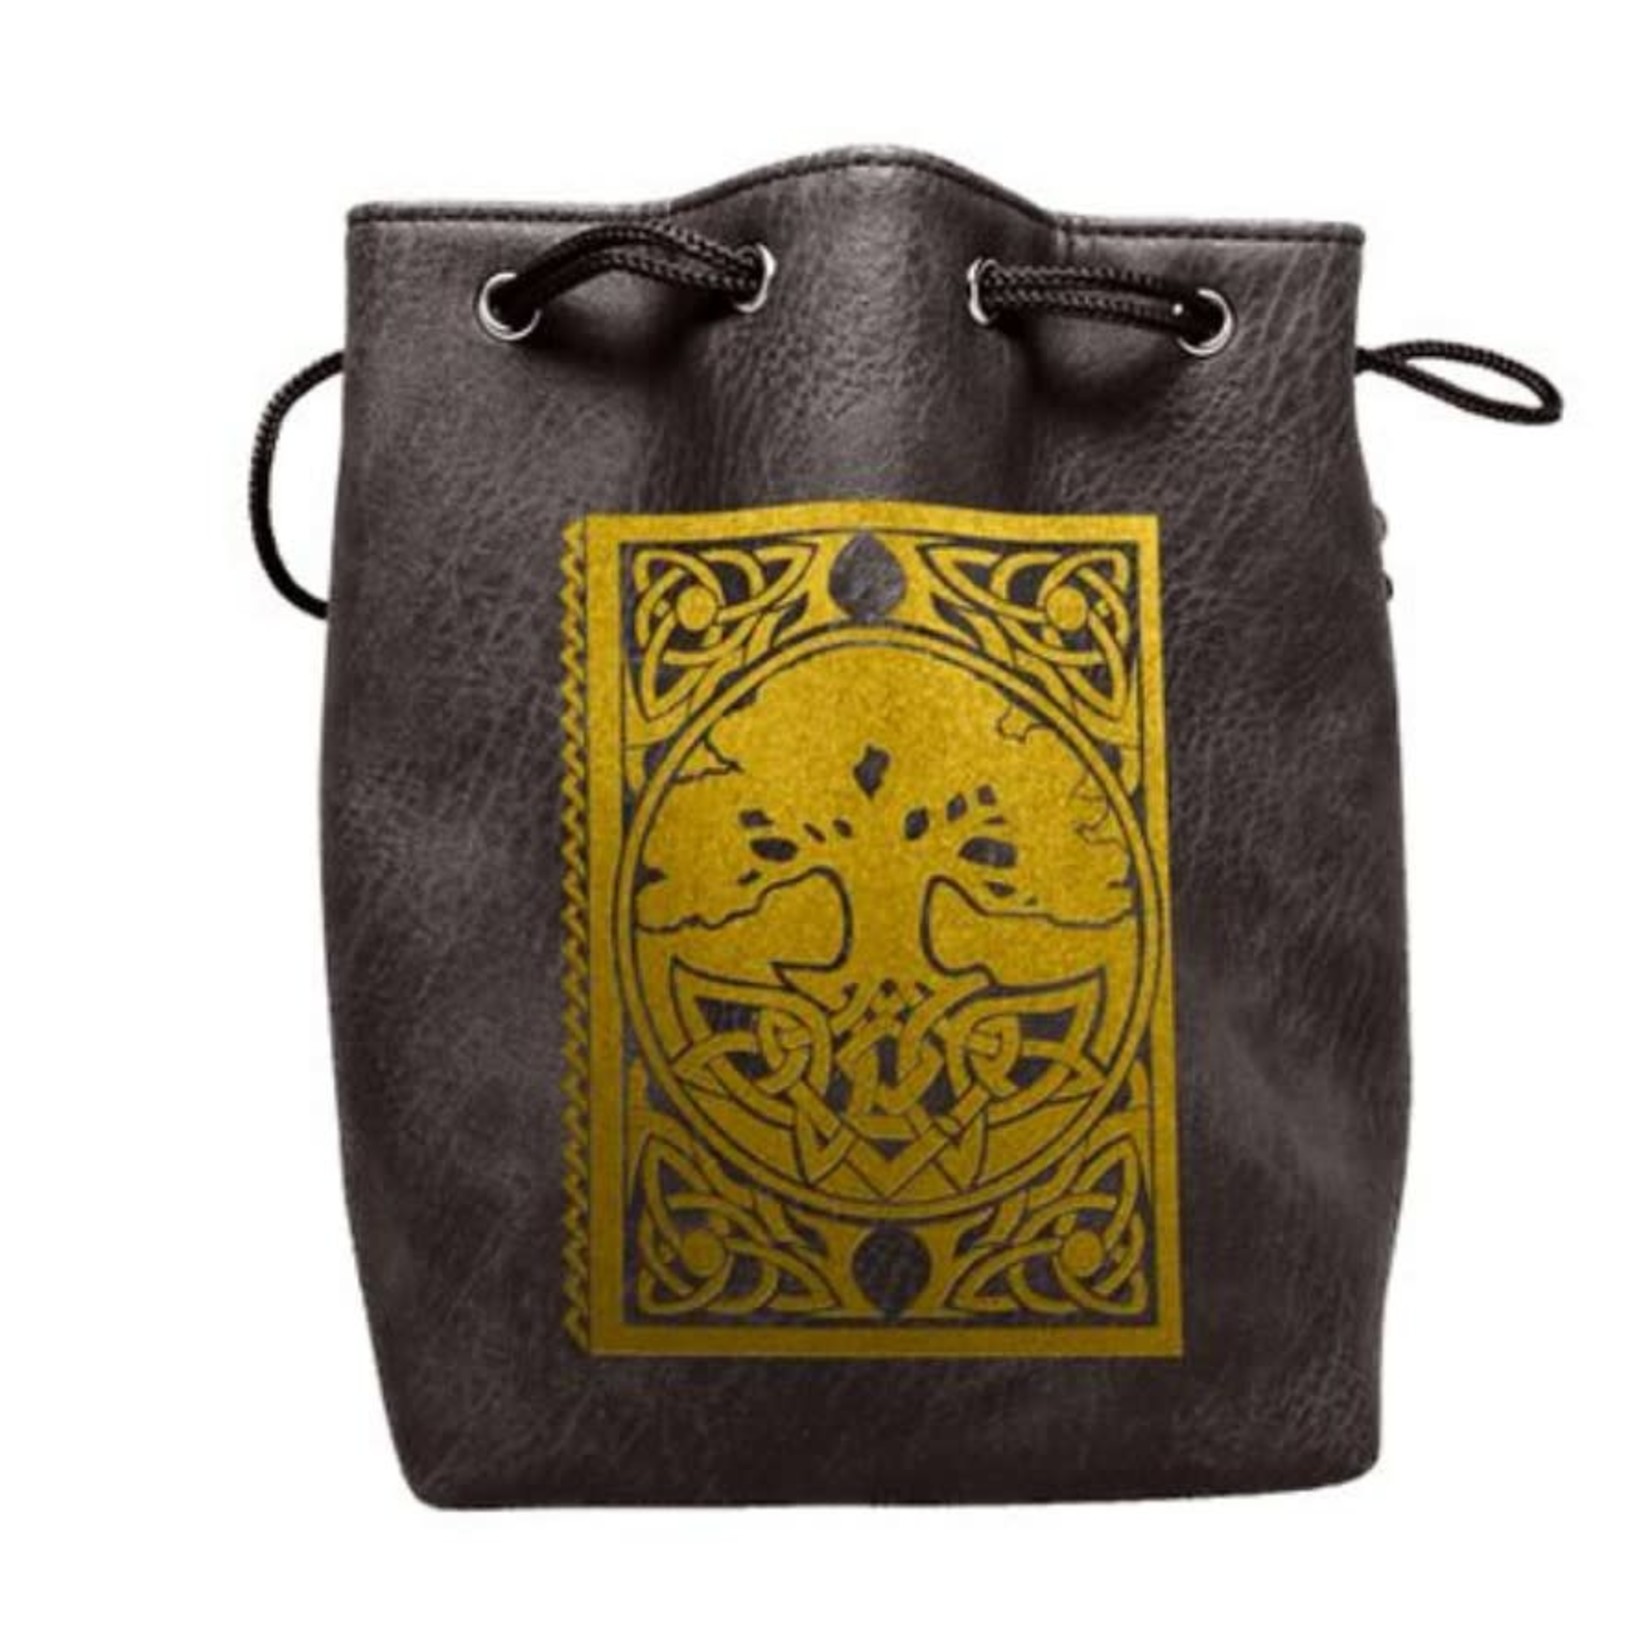 Easy Roller Dice Leather Lite Self-Standing Large Dice Bag